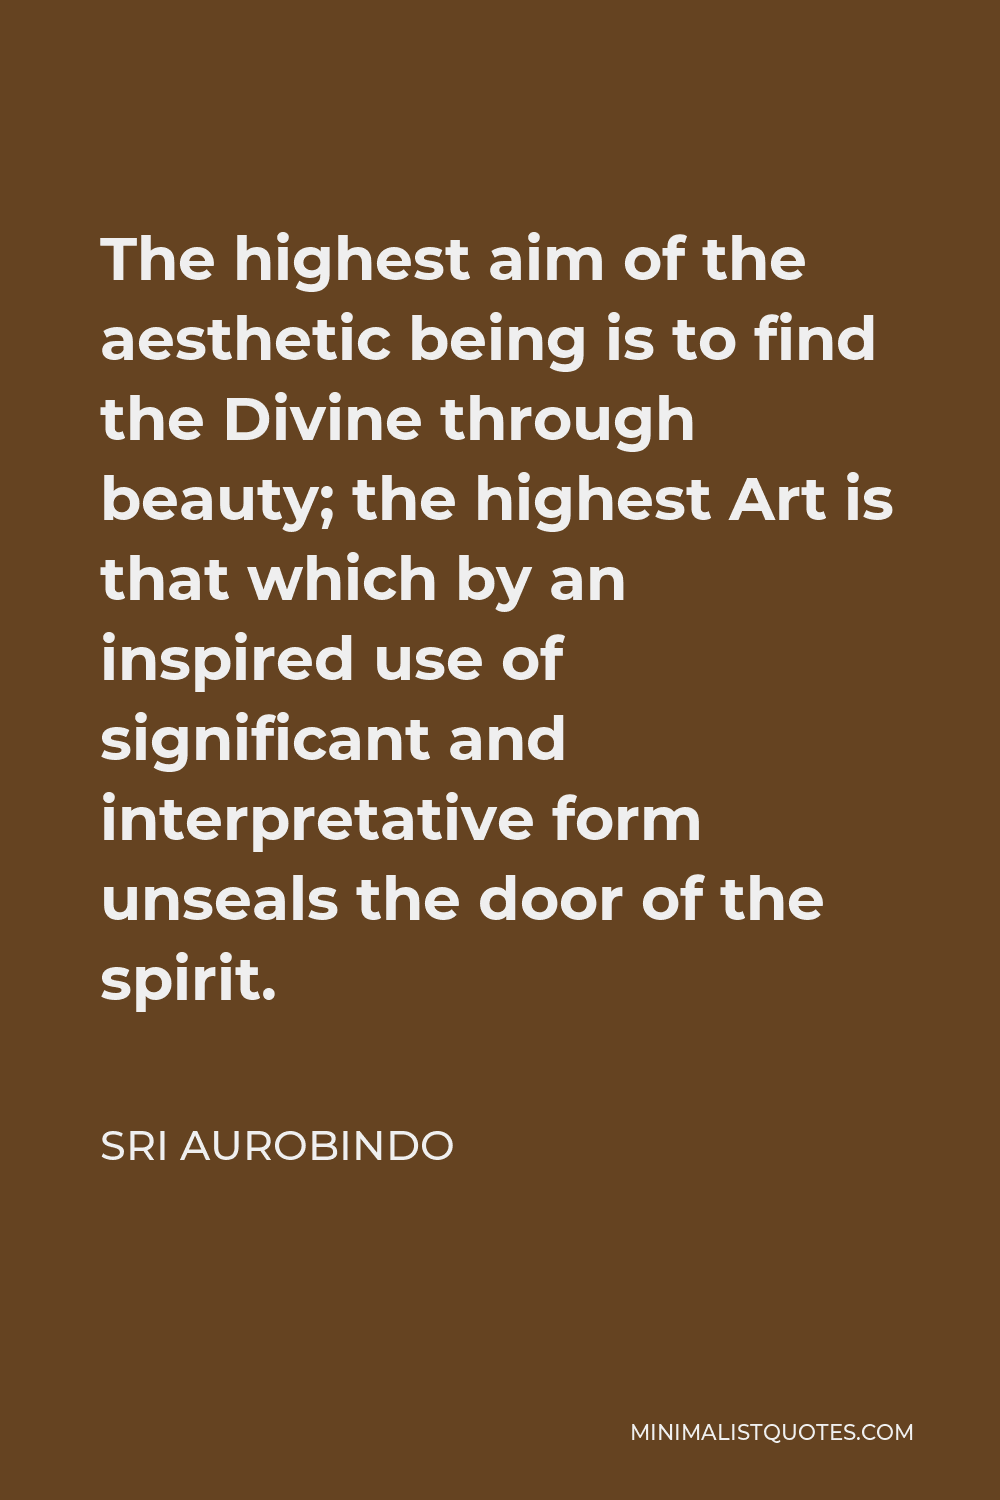 Sri Aurobindo Quote - The highest aim of the aesthetic being is to find the Divine through beauty; the highest Art is that which by an inspired use of significant and interpretative form unseals the door of the spirit.